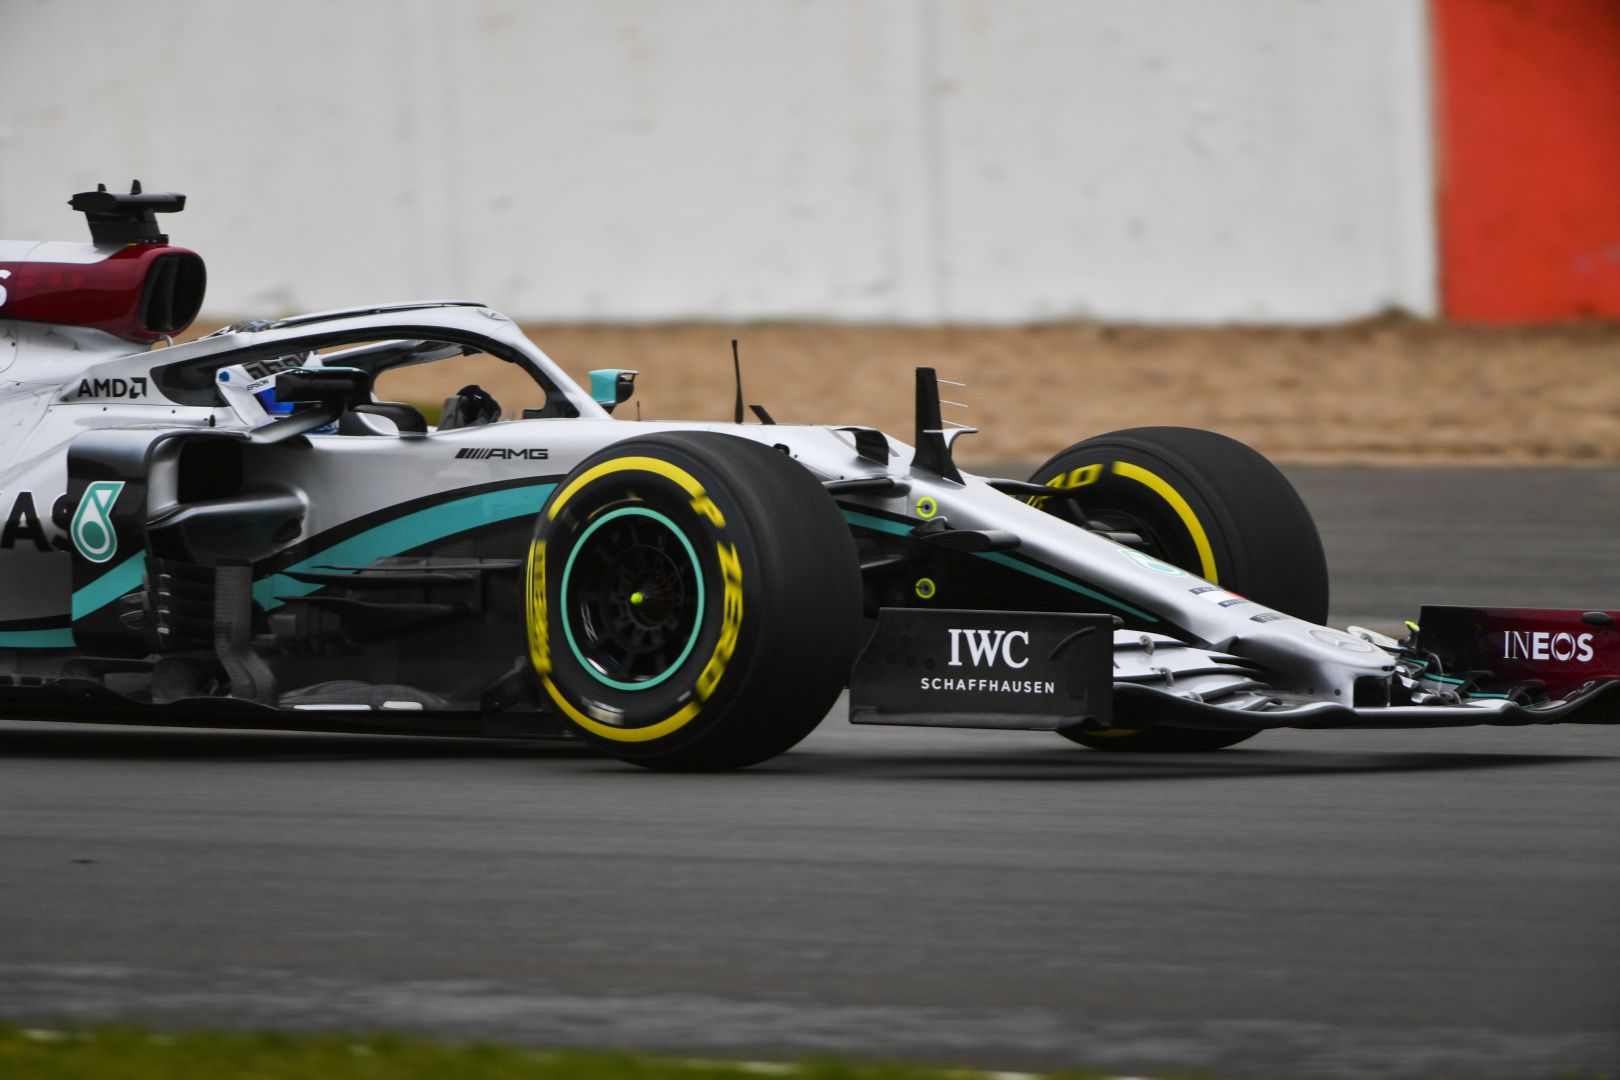 Formula 1: Mercedes reveal the W11 at Silverstone shakedown